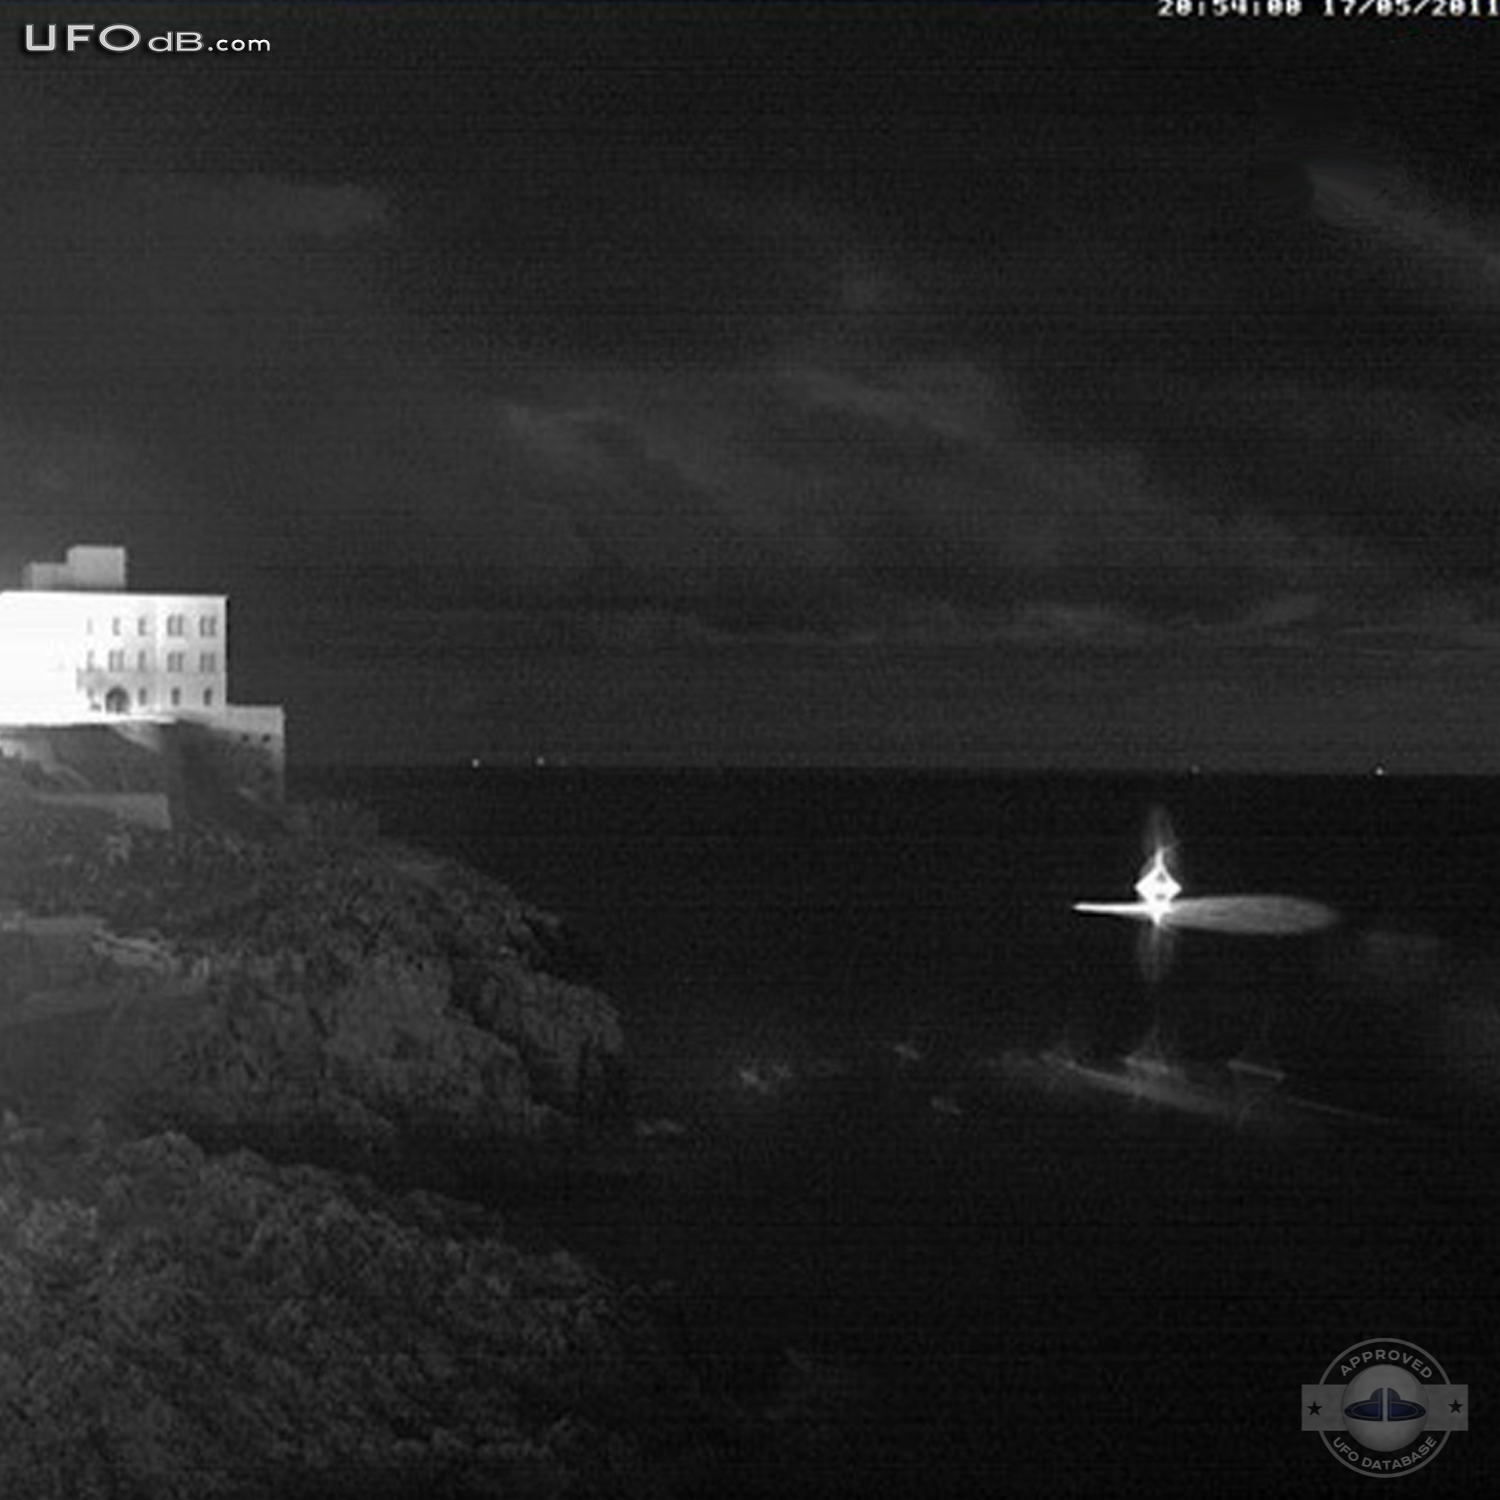 Santa Cesarea Terme floating UFO caught on Cam | Italy | May 17 2011 UFO Picture #295-2